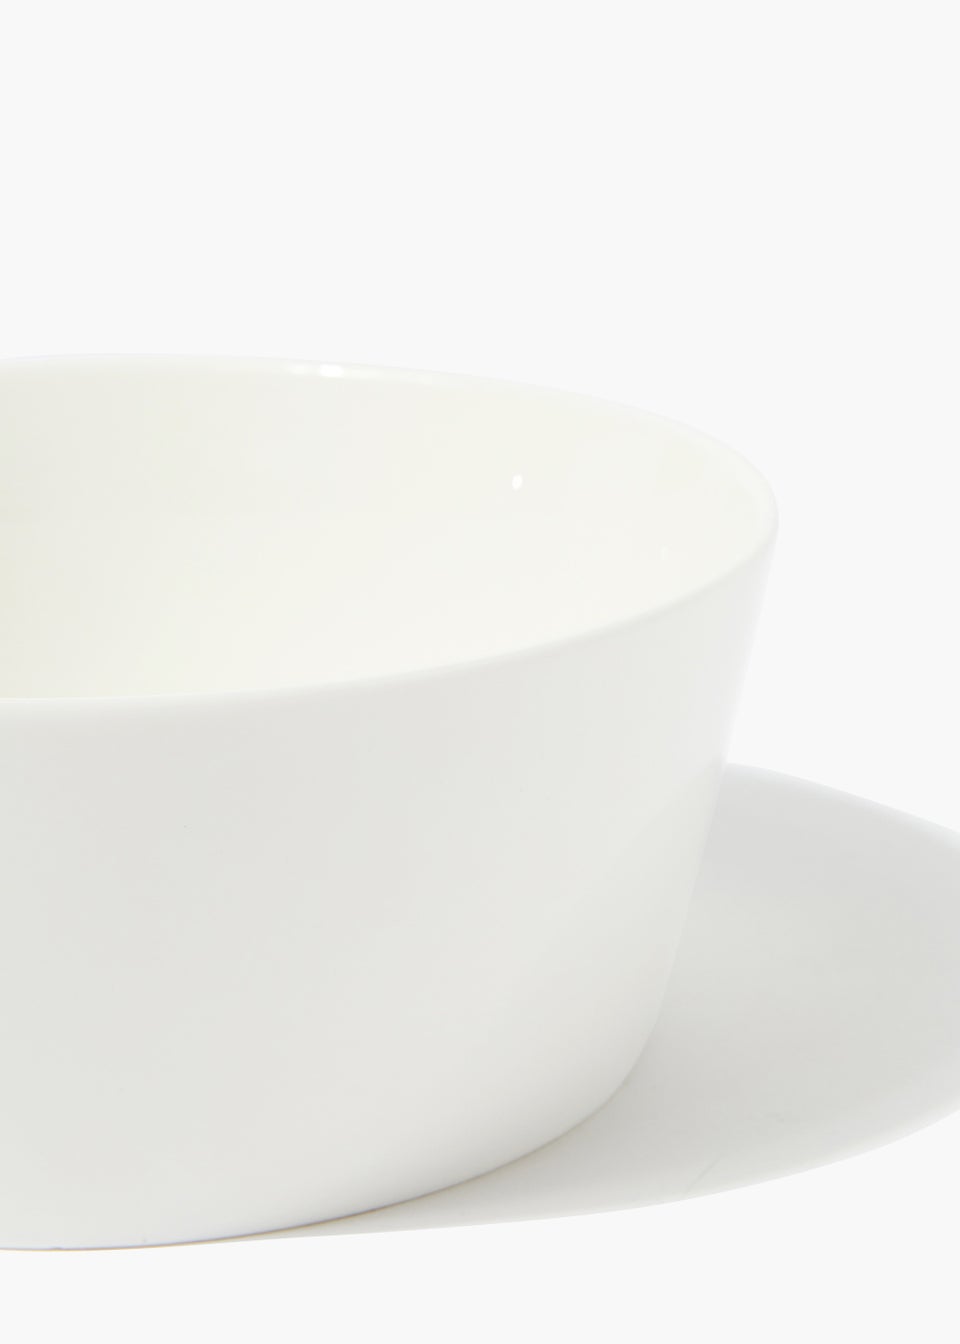 White Lipped Cereal Bowl (15cm x 6.5cm)